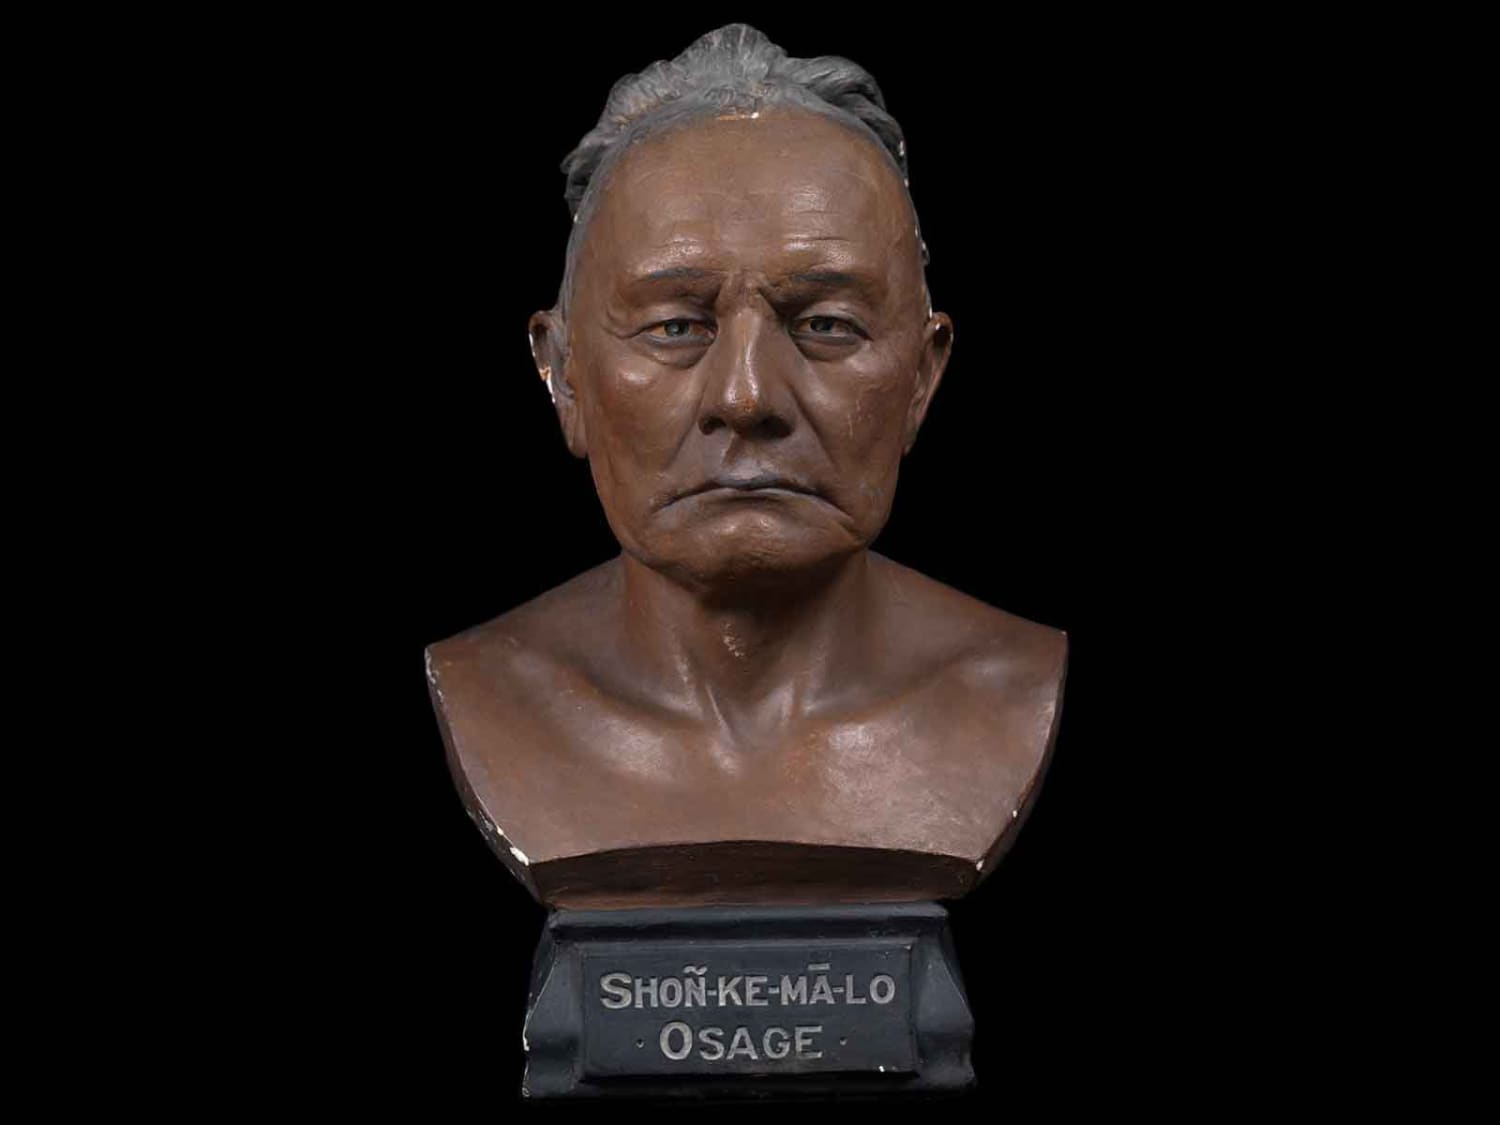 Recognition of Major Osage Leader and Warrior Opens a New Window Into History